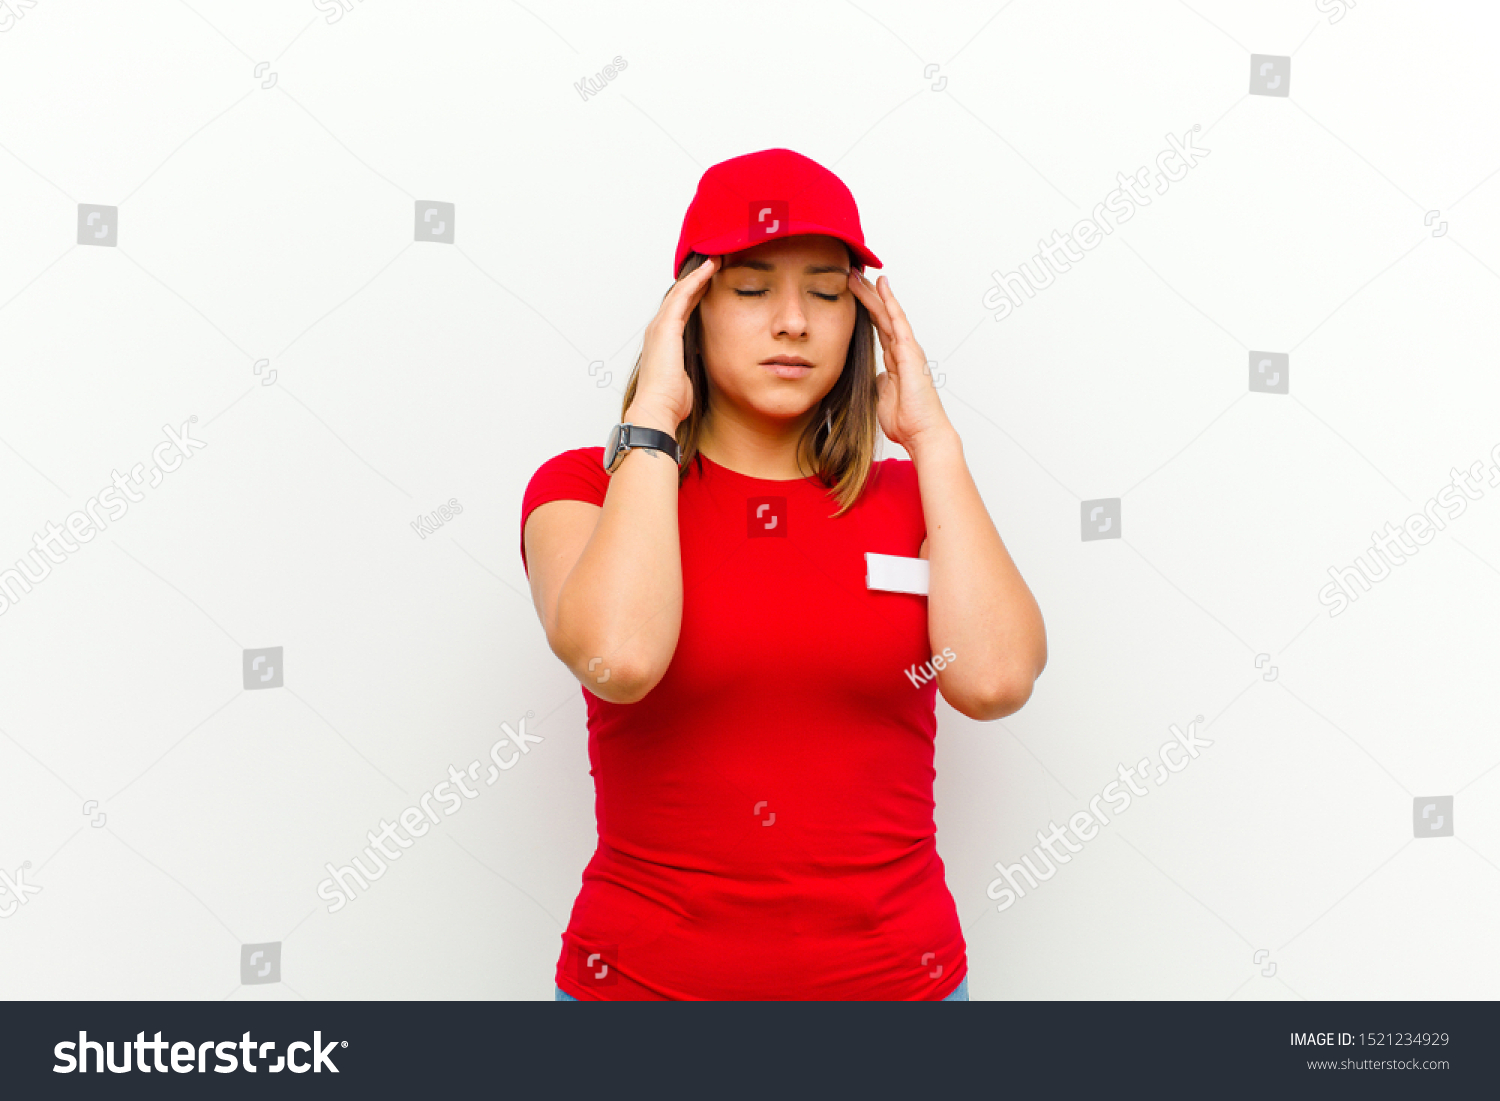 delivery woman looking concentrated, thoughtful and inspired, brainstorming and imagining with hands on forehead against white background #1521234929